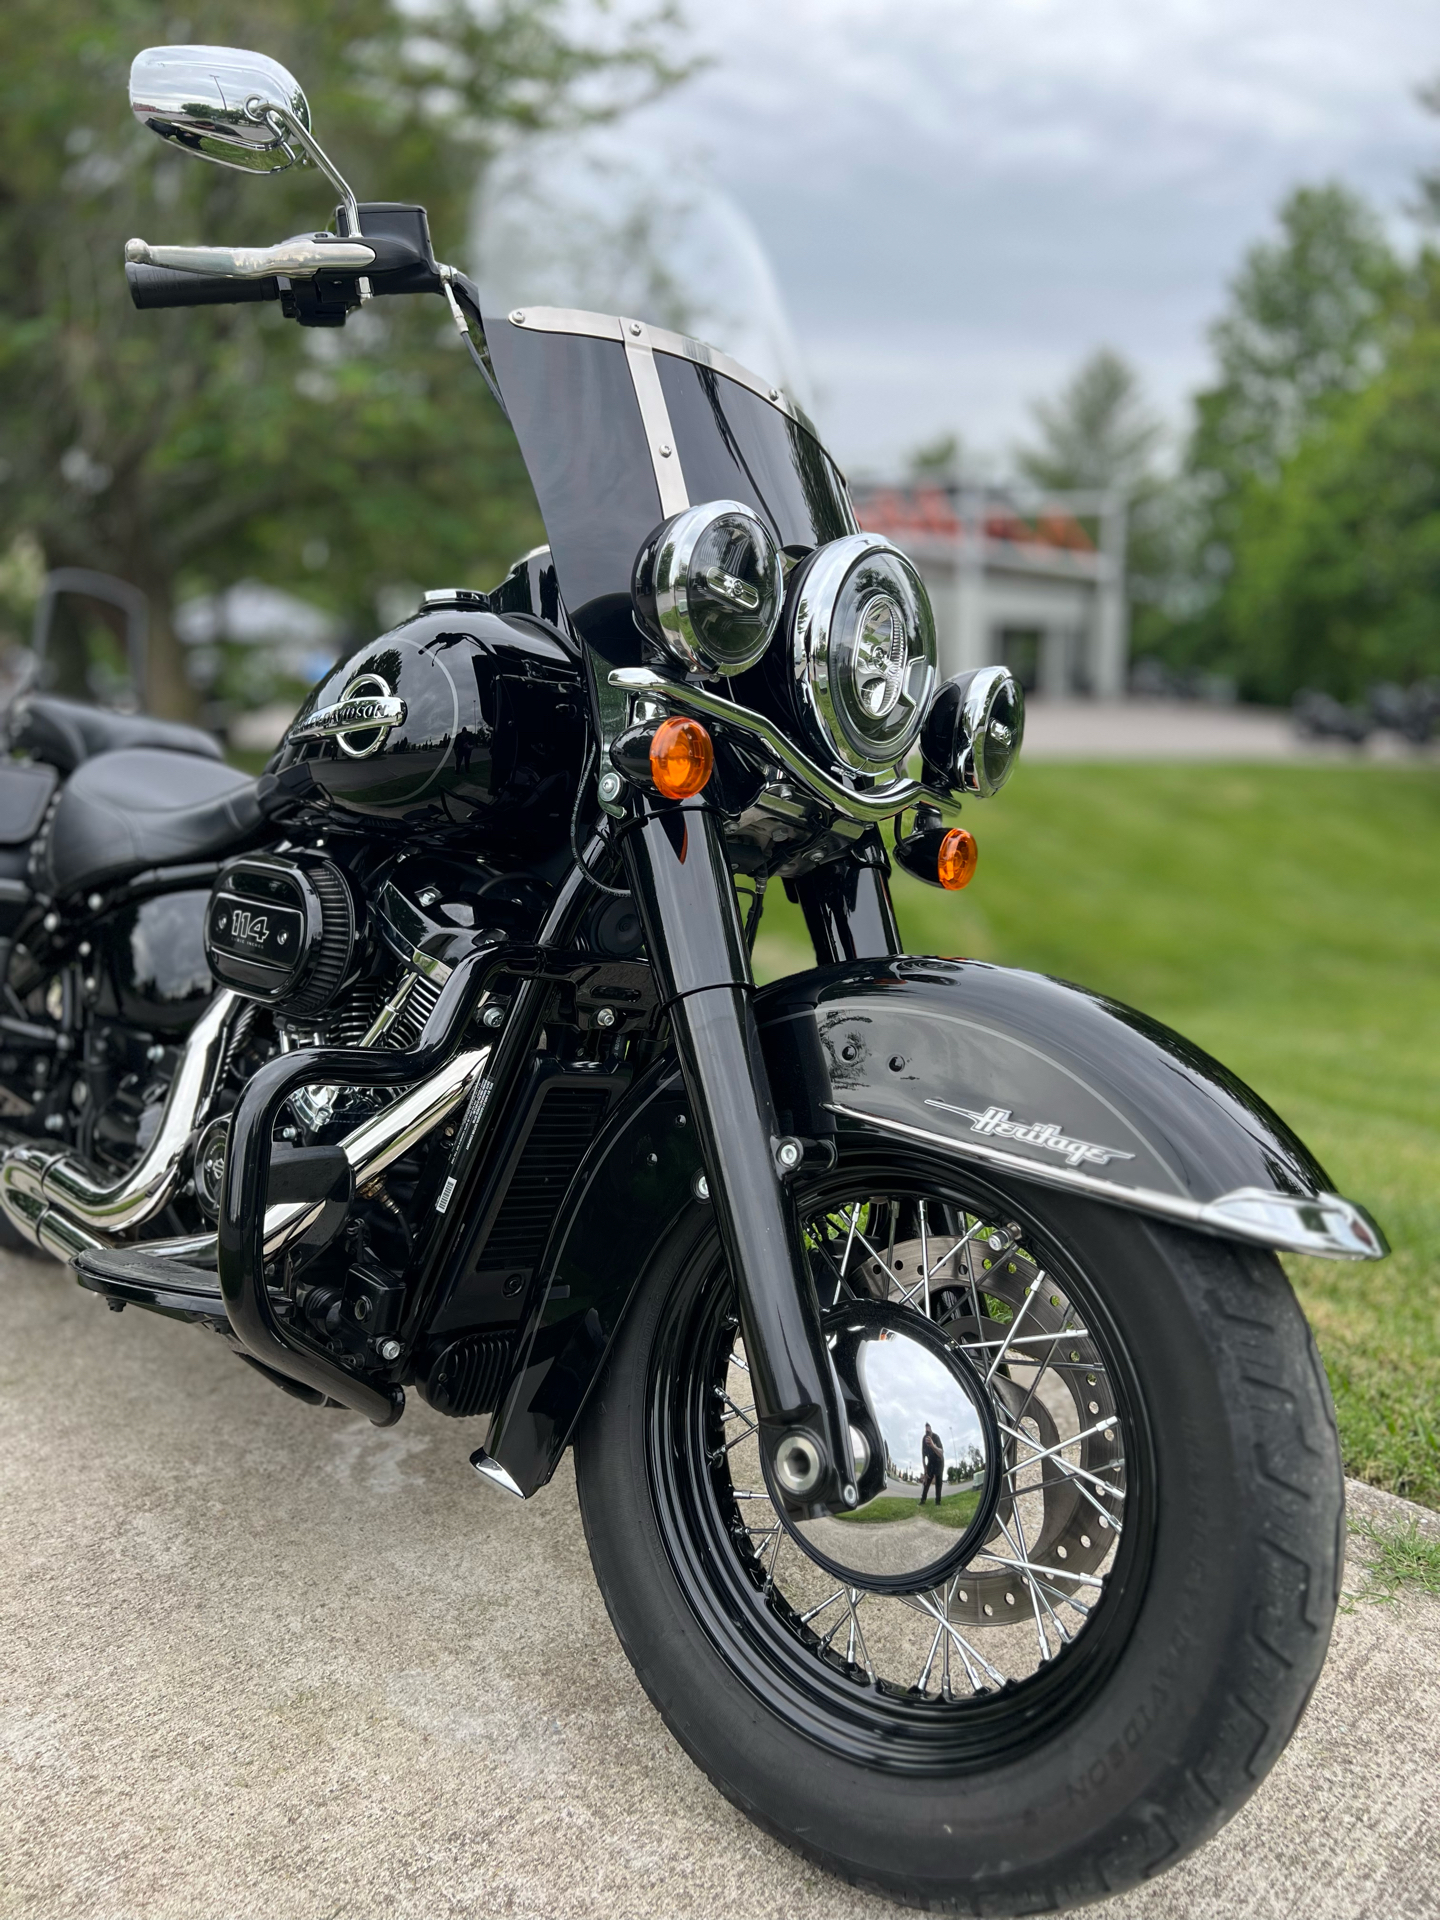 2019 Harley-Davidson Heritage Classic 114 in Franklin, Tennessee - Photo 3